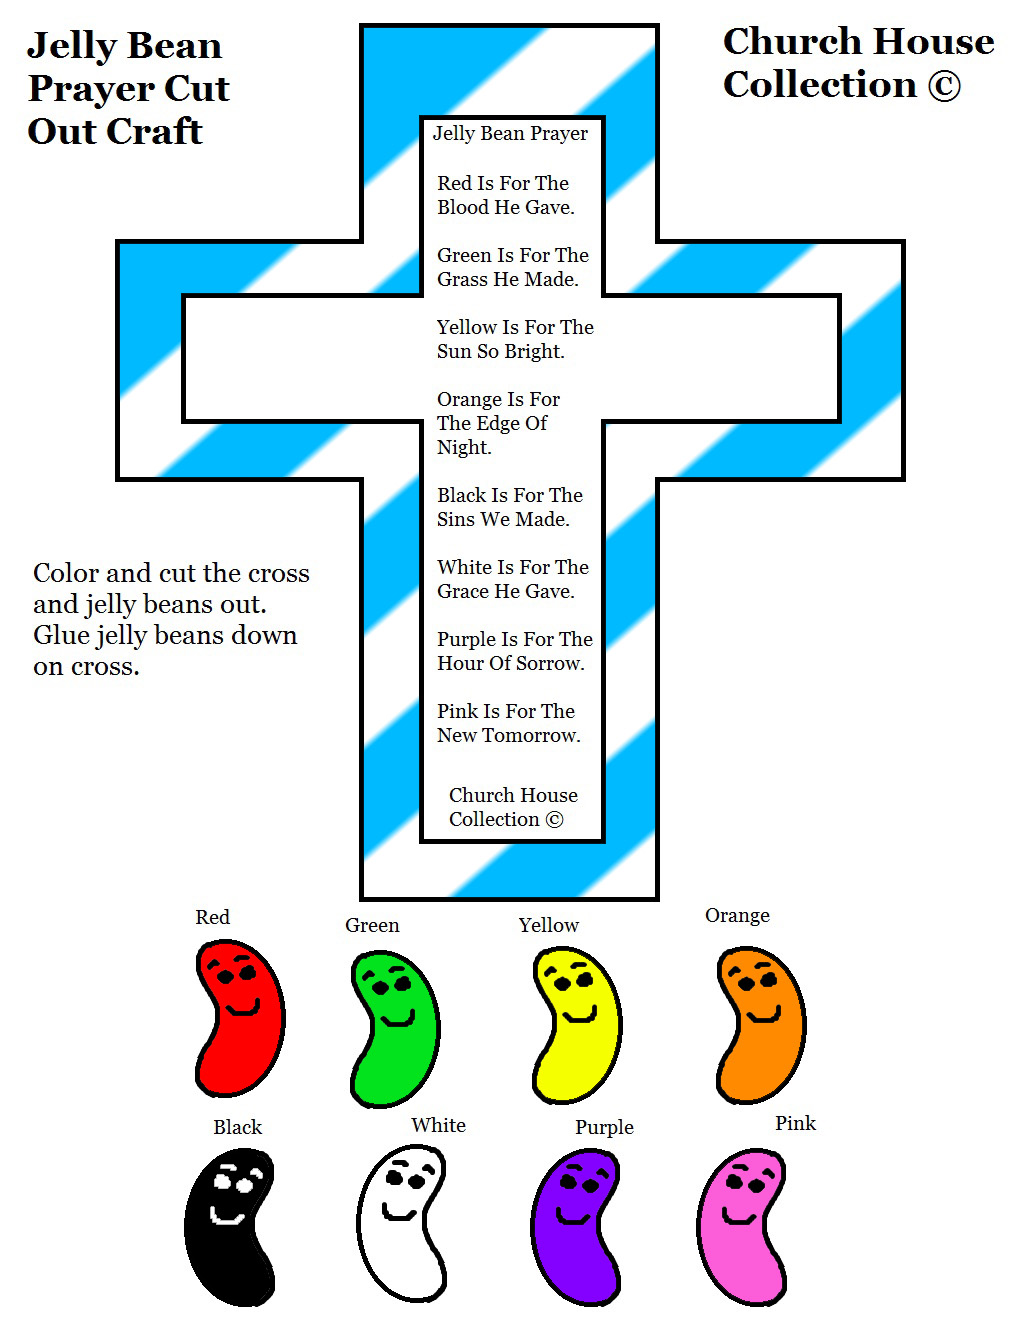 church-house-collection-blog-jelly-bean-prayer-cross-cut-out-plant